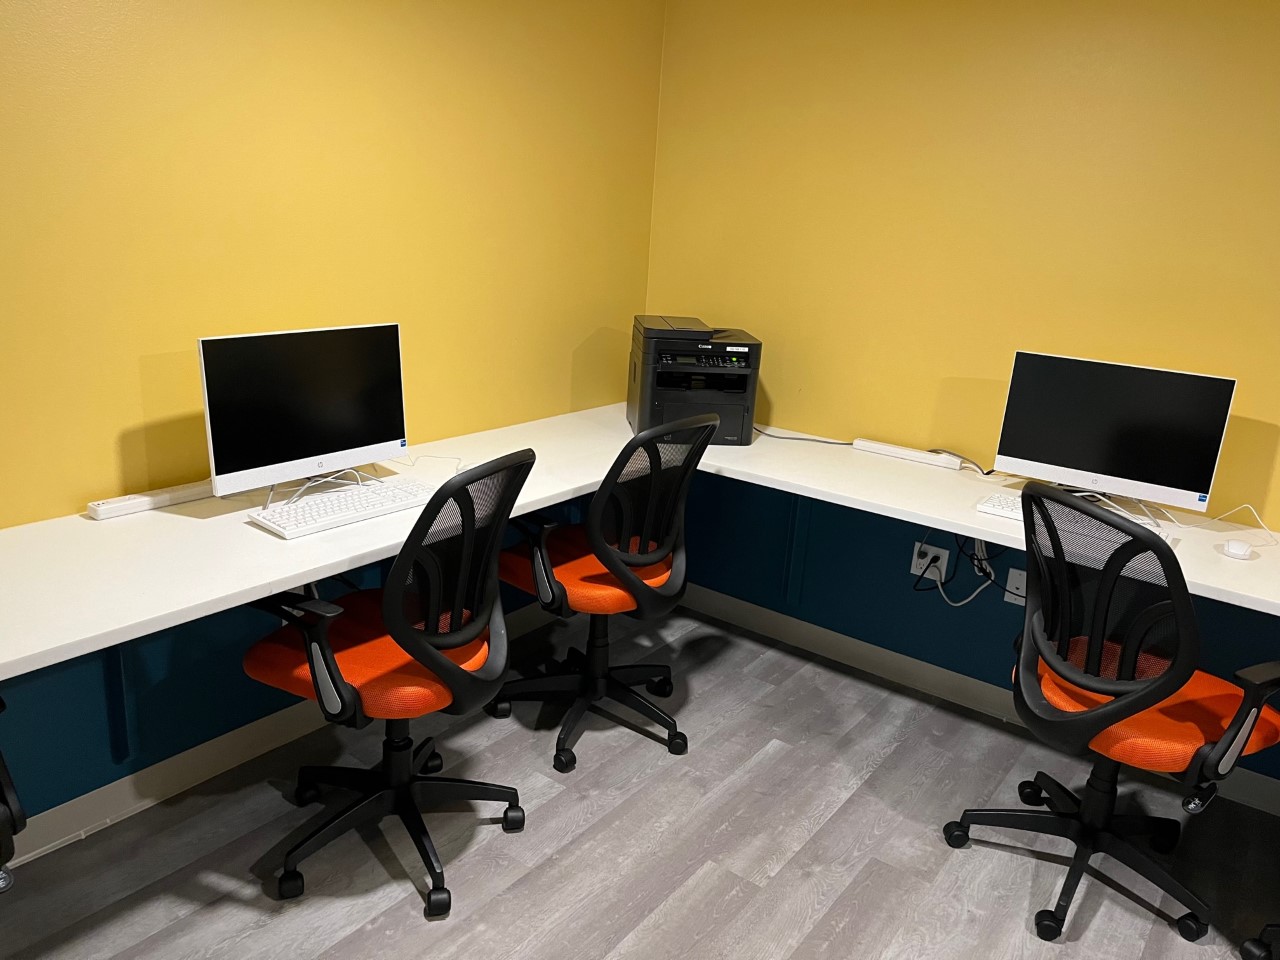 A room with blue and yellow walls. Two computers on a white desk with three office chairs.